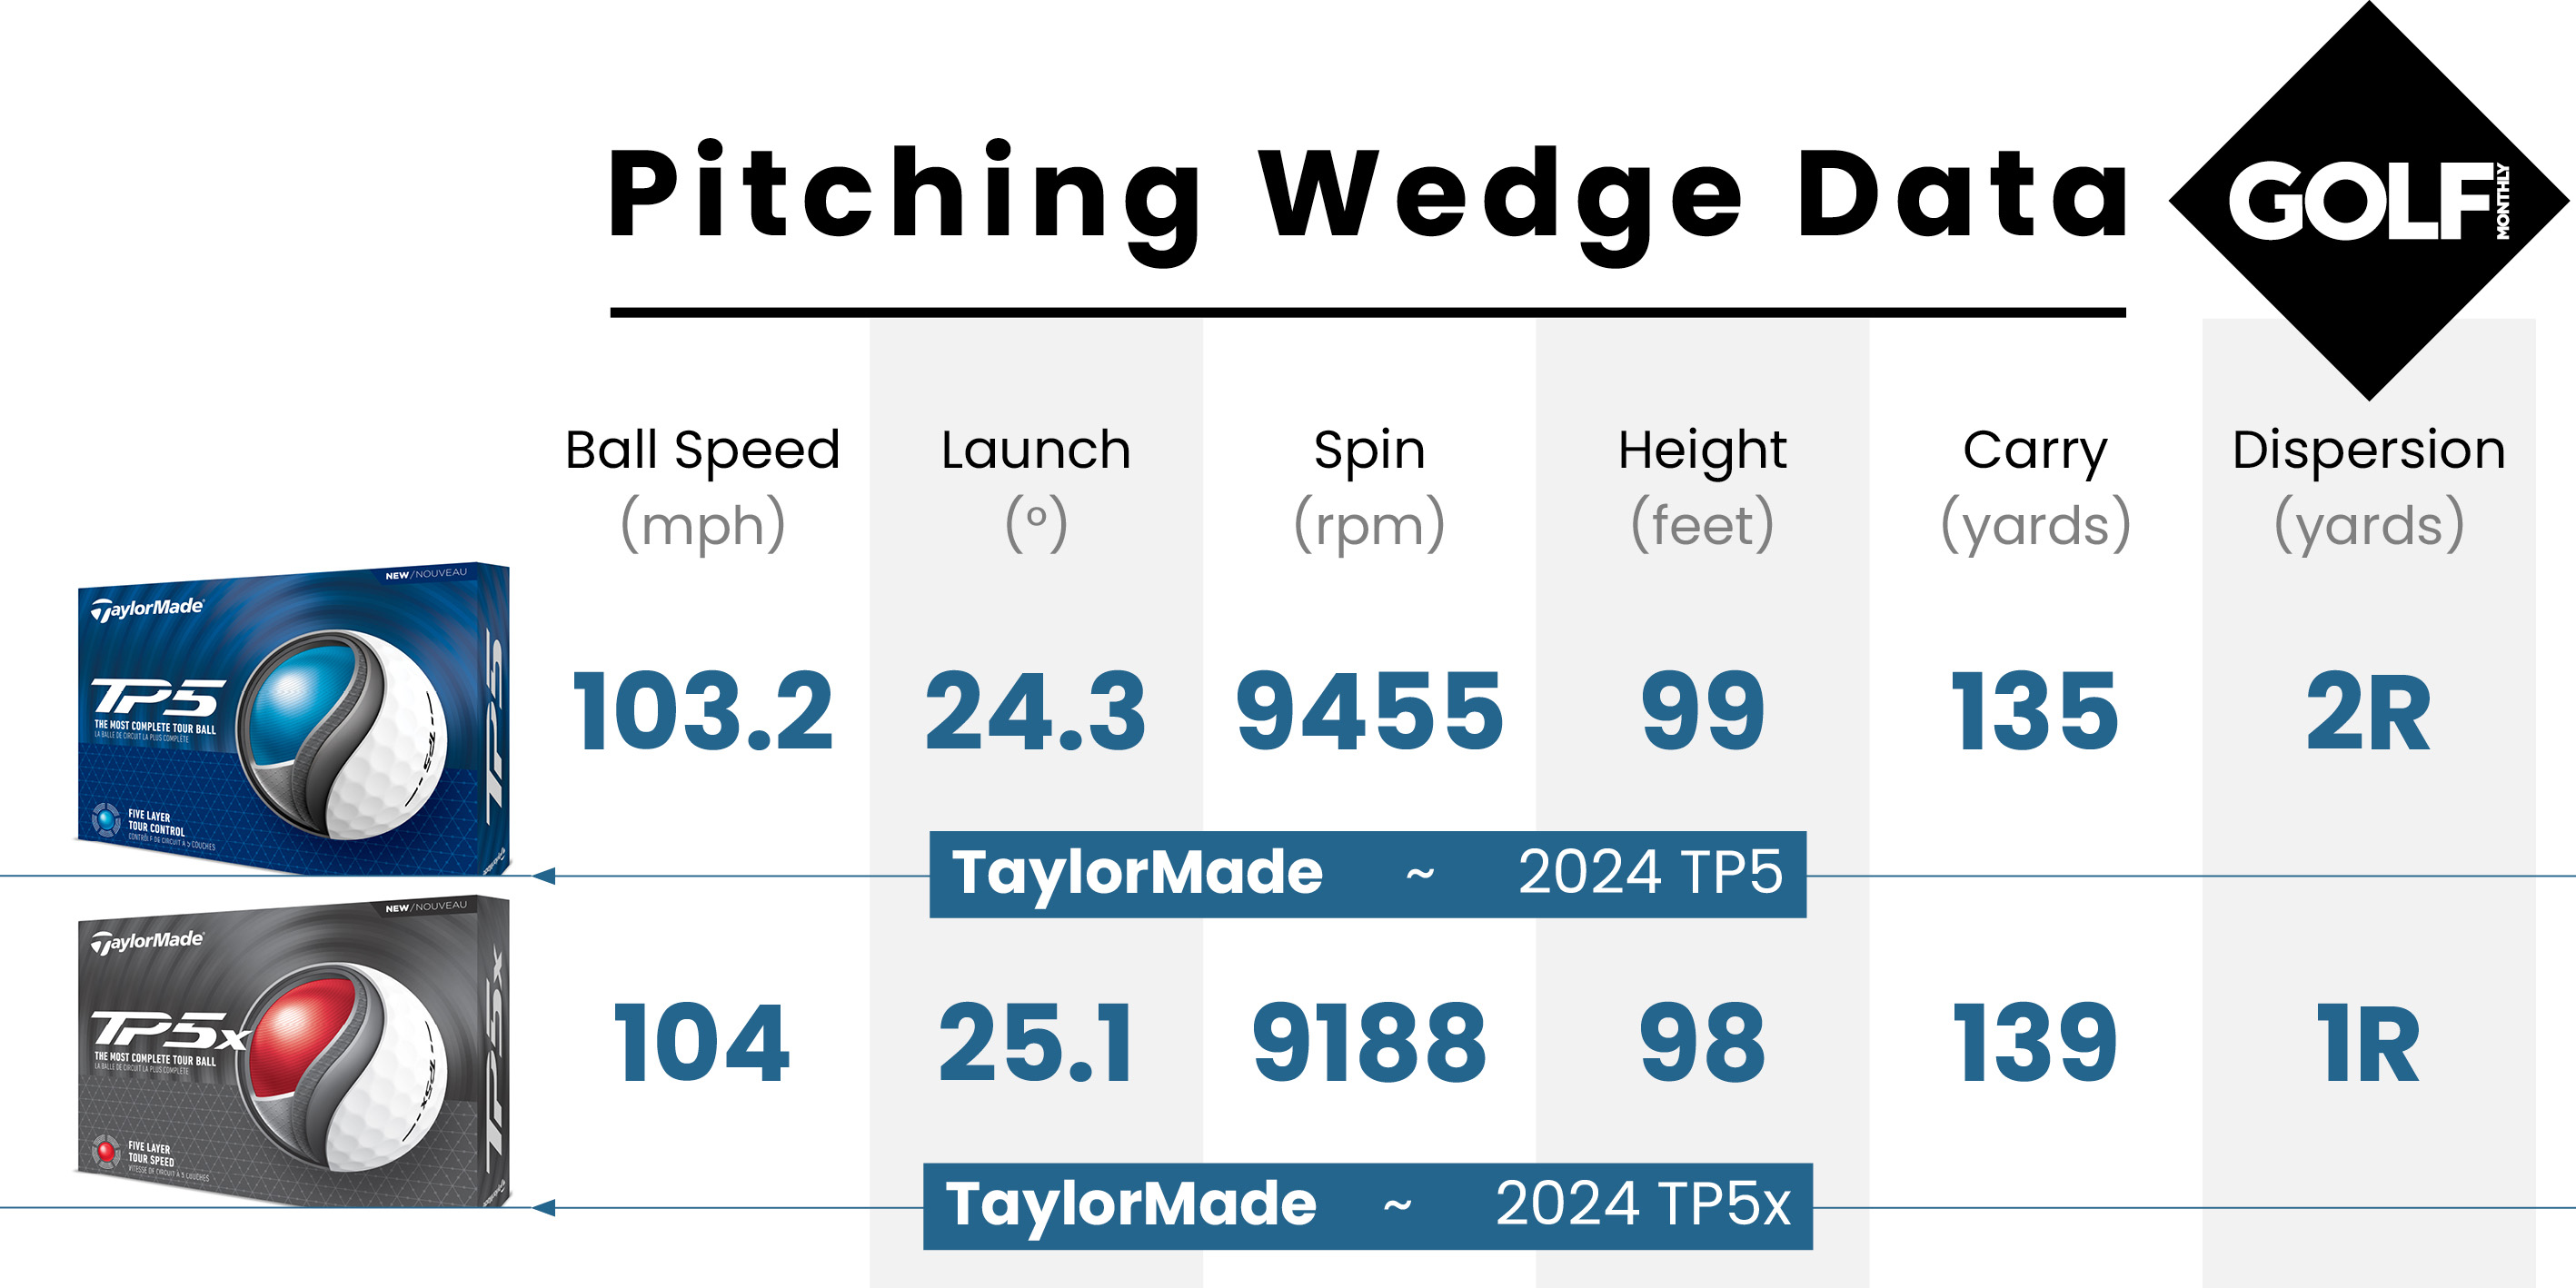 Pitching wedge data from the TaylorMade 2024 TP5x Golf Ball